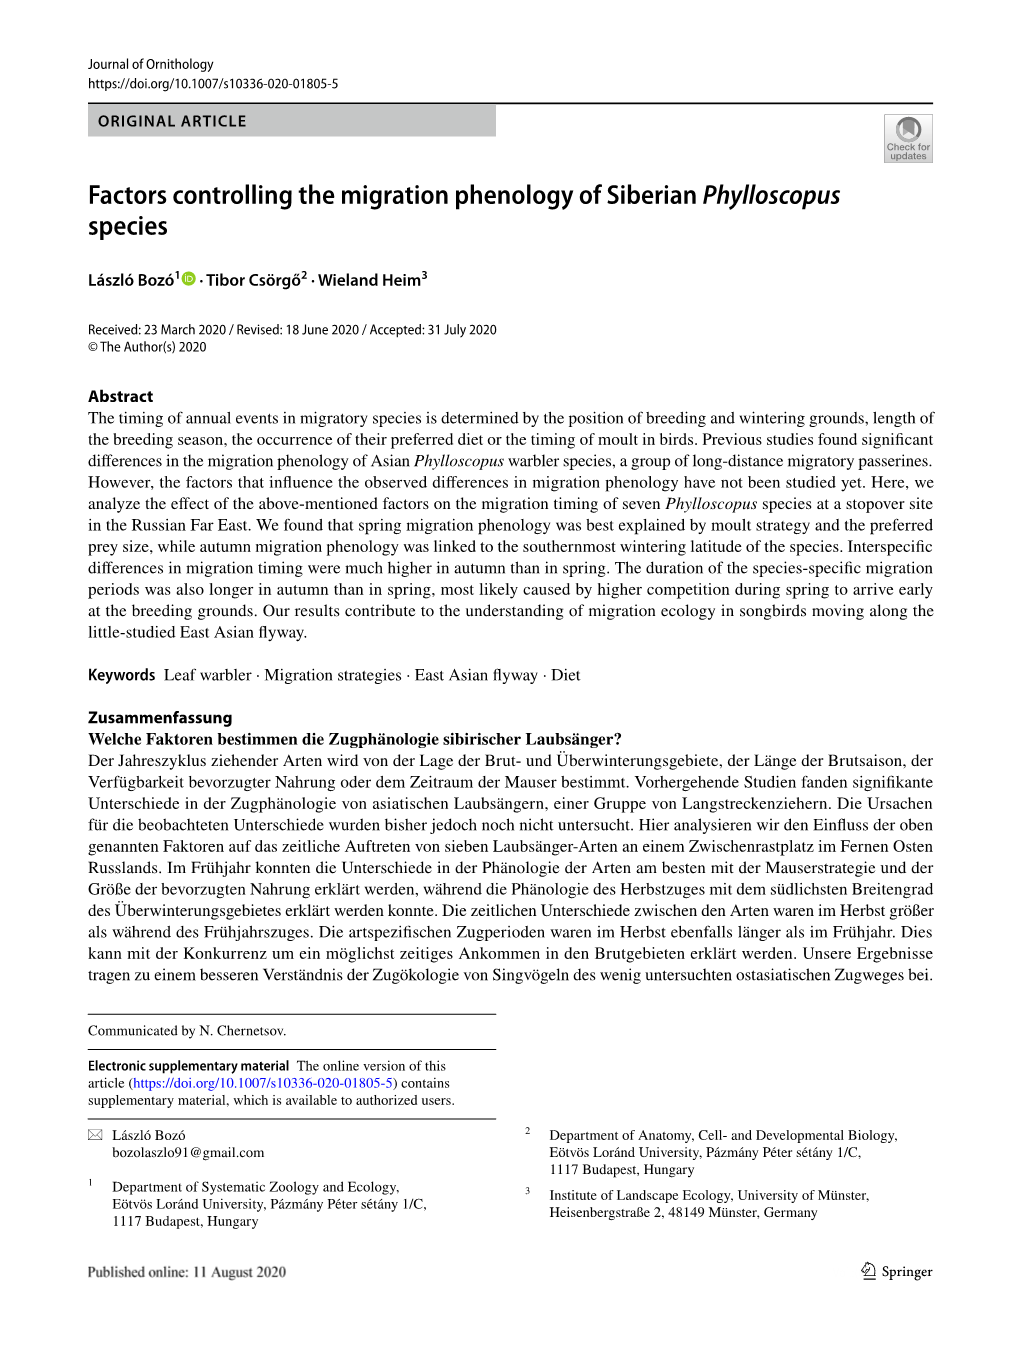 Factors Controlling the Migration Phenology of Siberian Phylloscopus Species